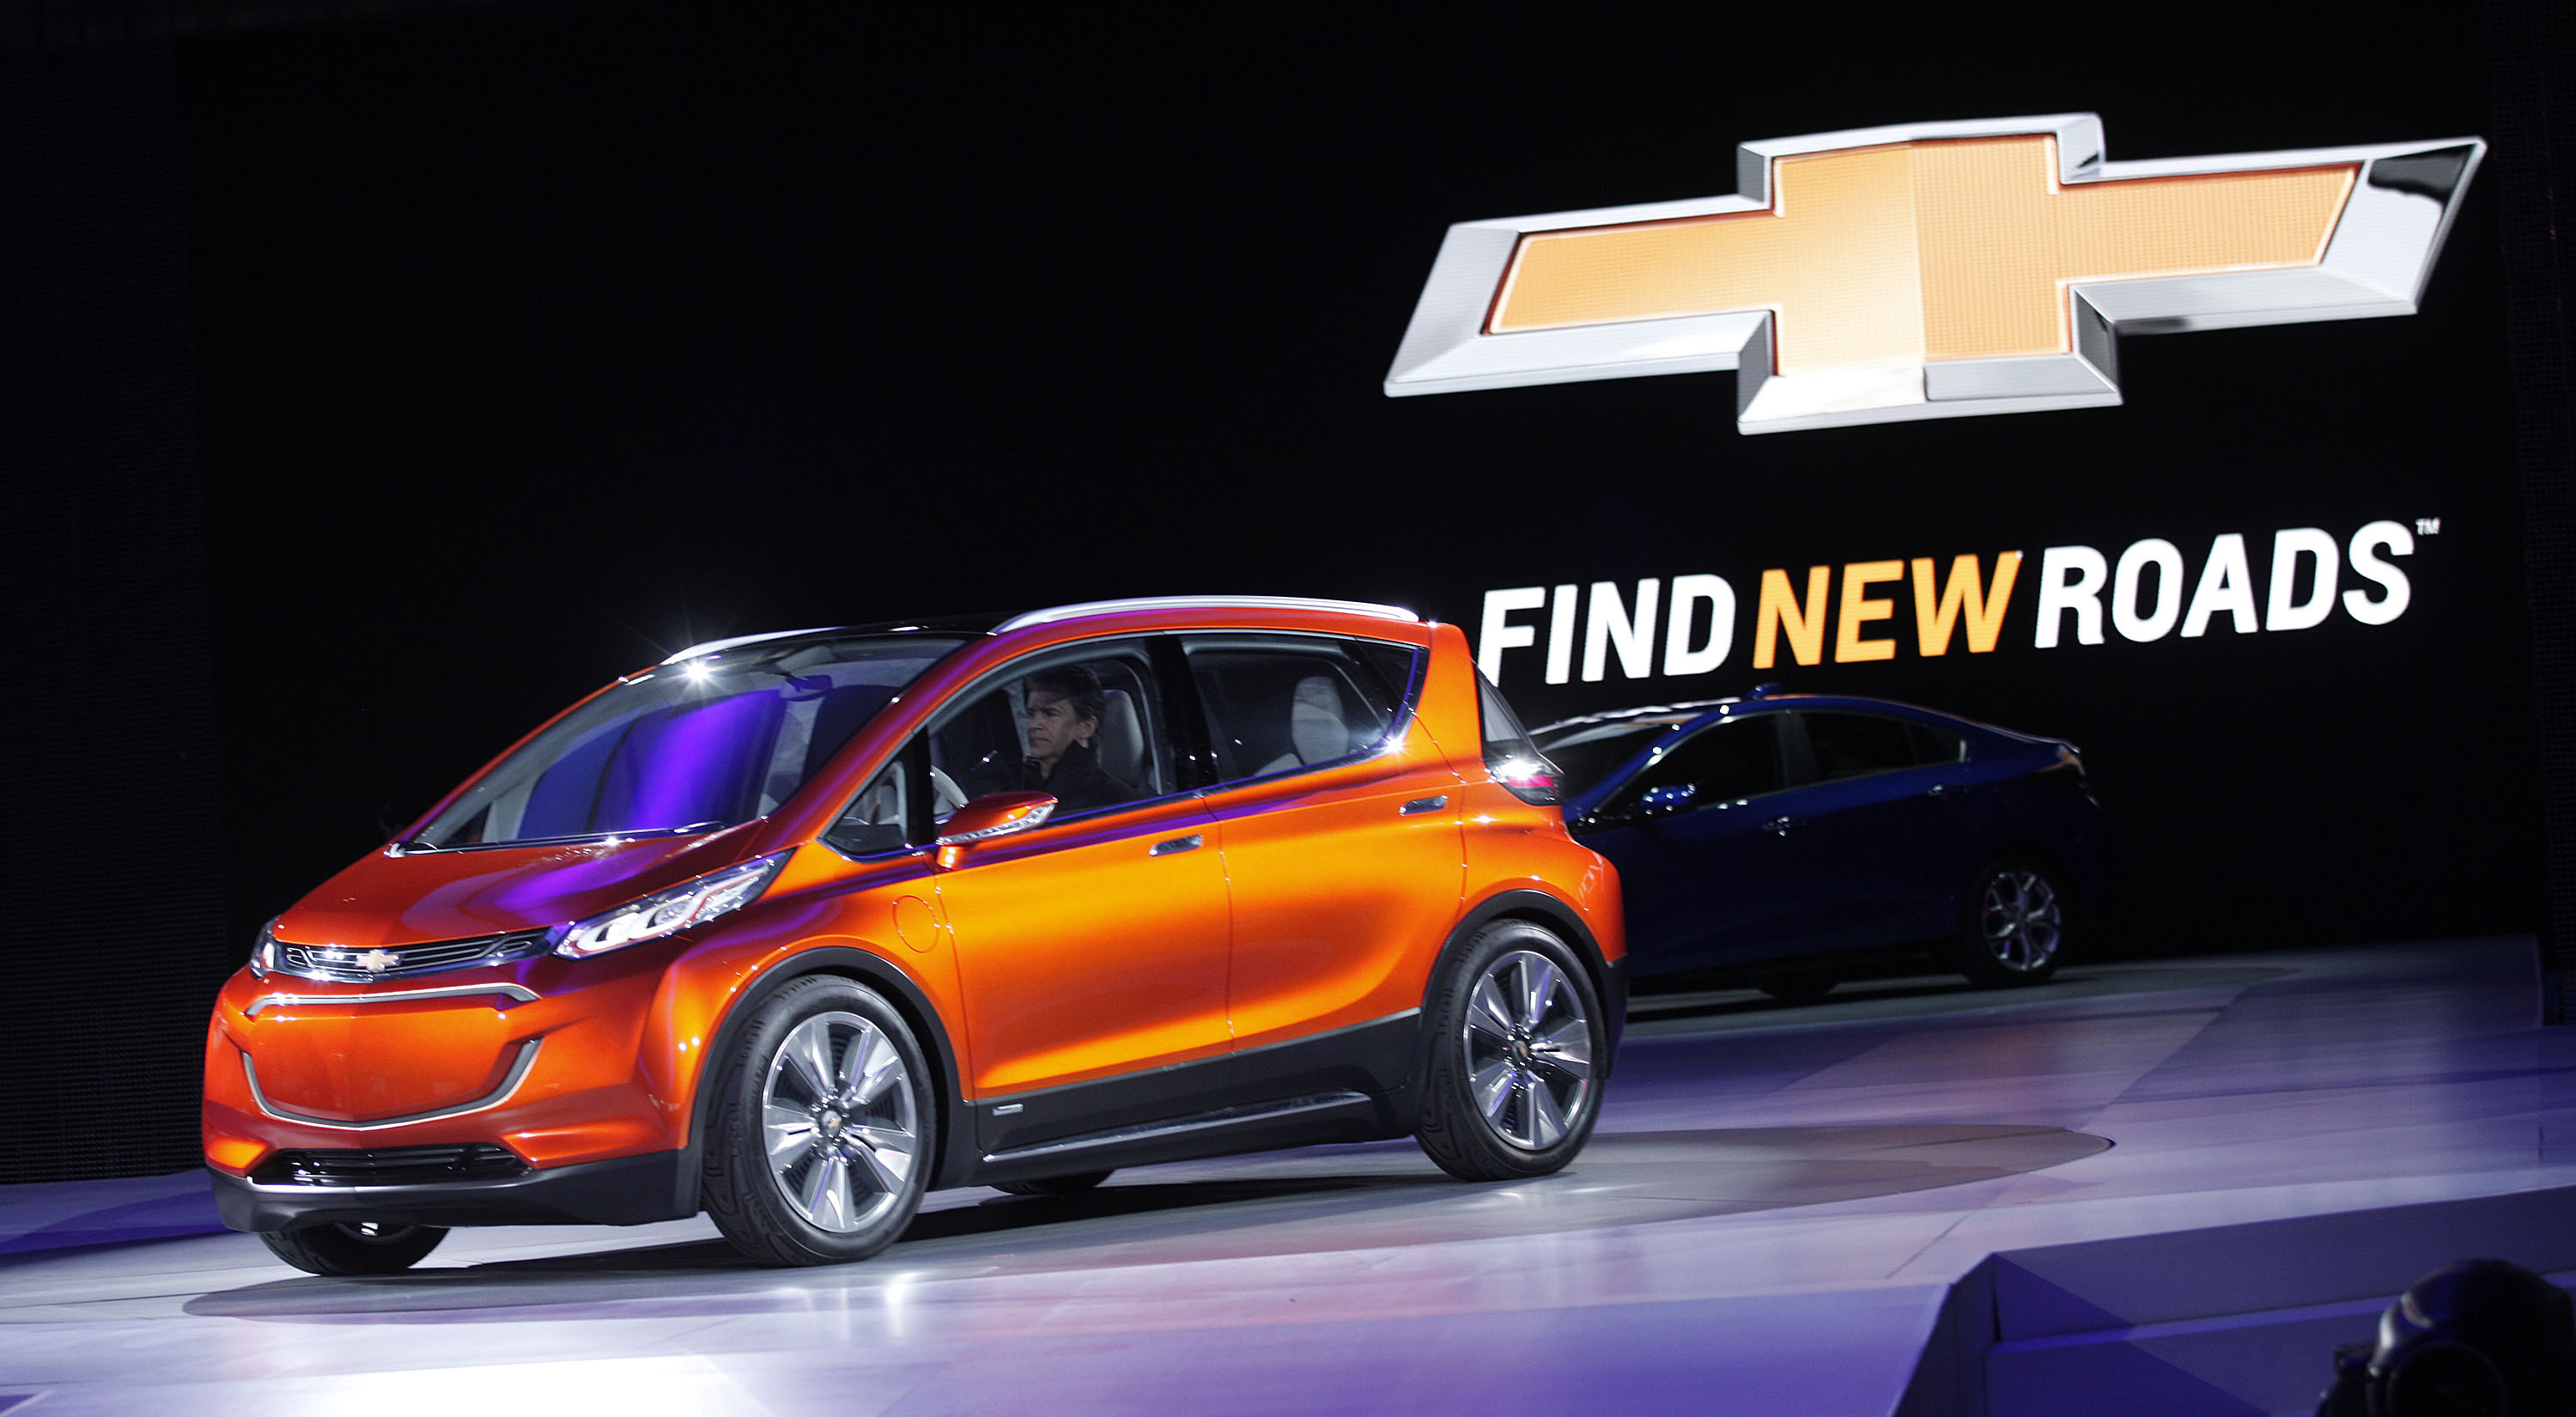  General Motors reveals the new Chevrolet Bolt concept to the media at the 2015 North American International Auto Show.